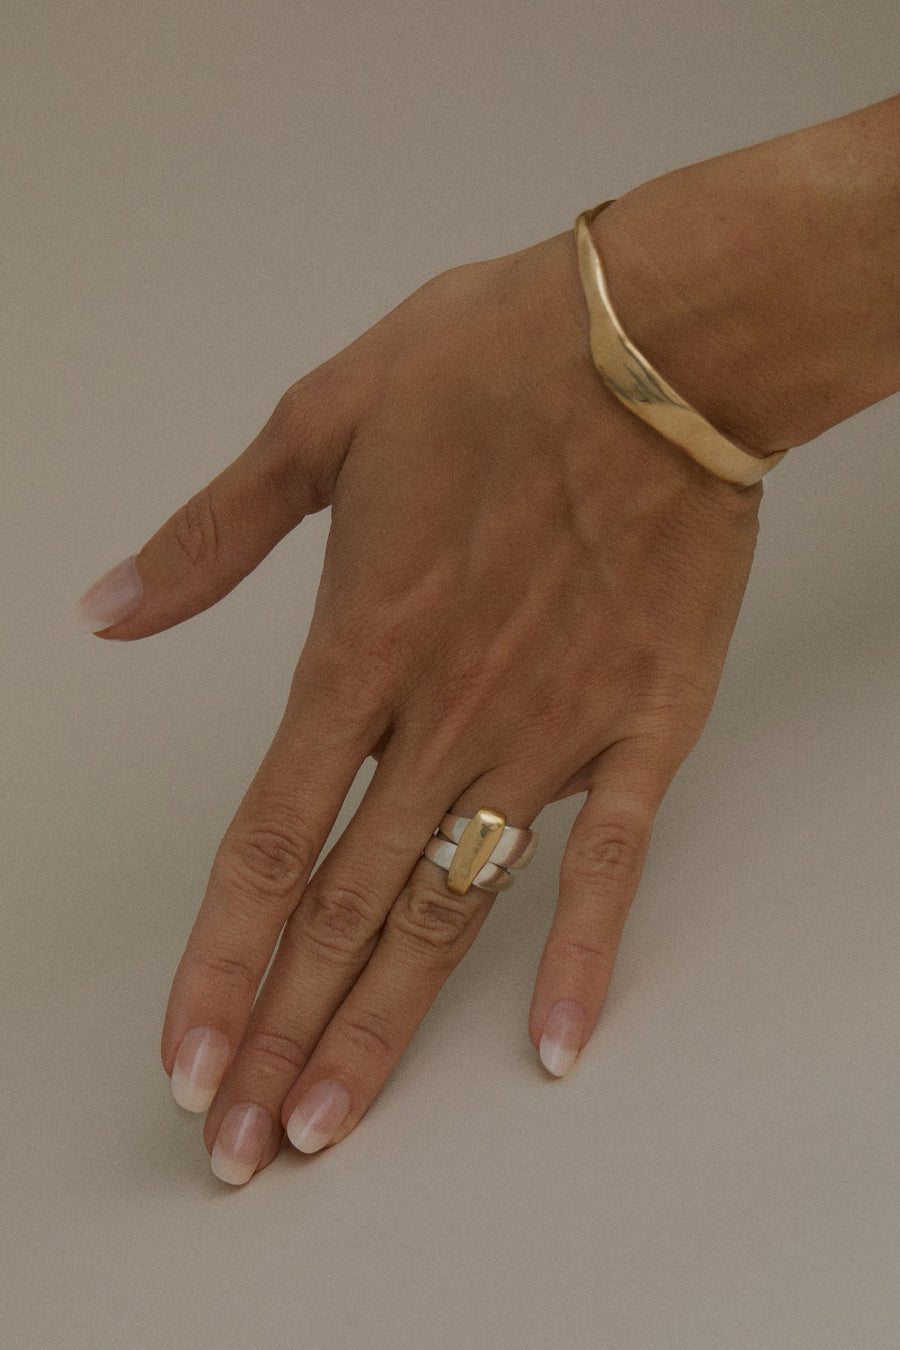 Hernan Herdez- Jewellery-jewelry-Jeryco Store- London- rings-rings for him-rings for her-unisex rings- 10 karat gold ring- solid gold ring- wedding ring for him-wedding ring for her-70s rings-sterling silver ring with gold plate-Dueto No.2 Ring